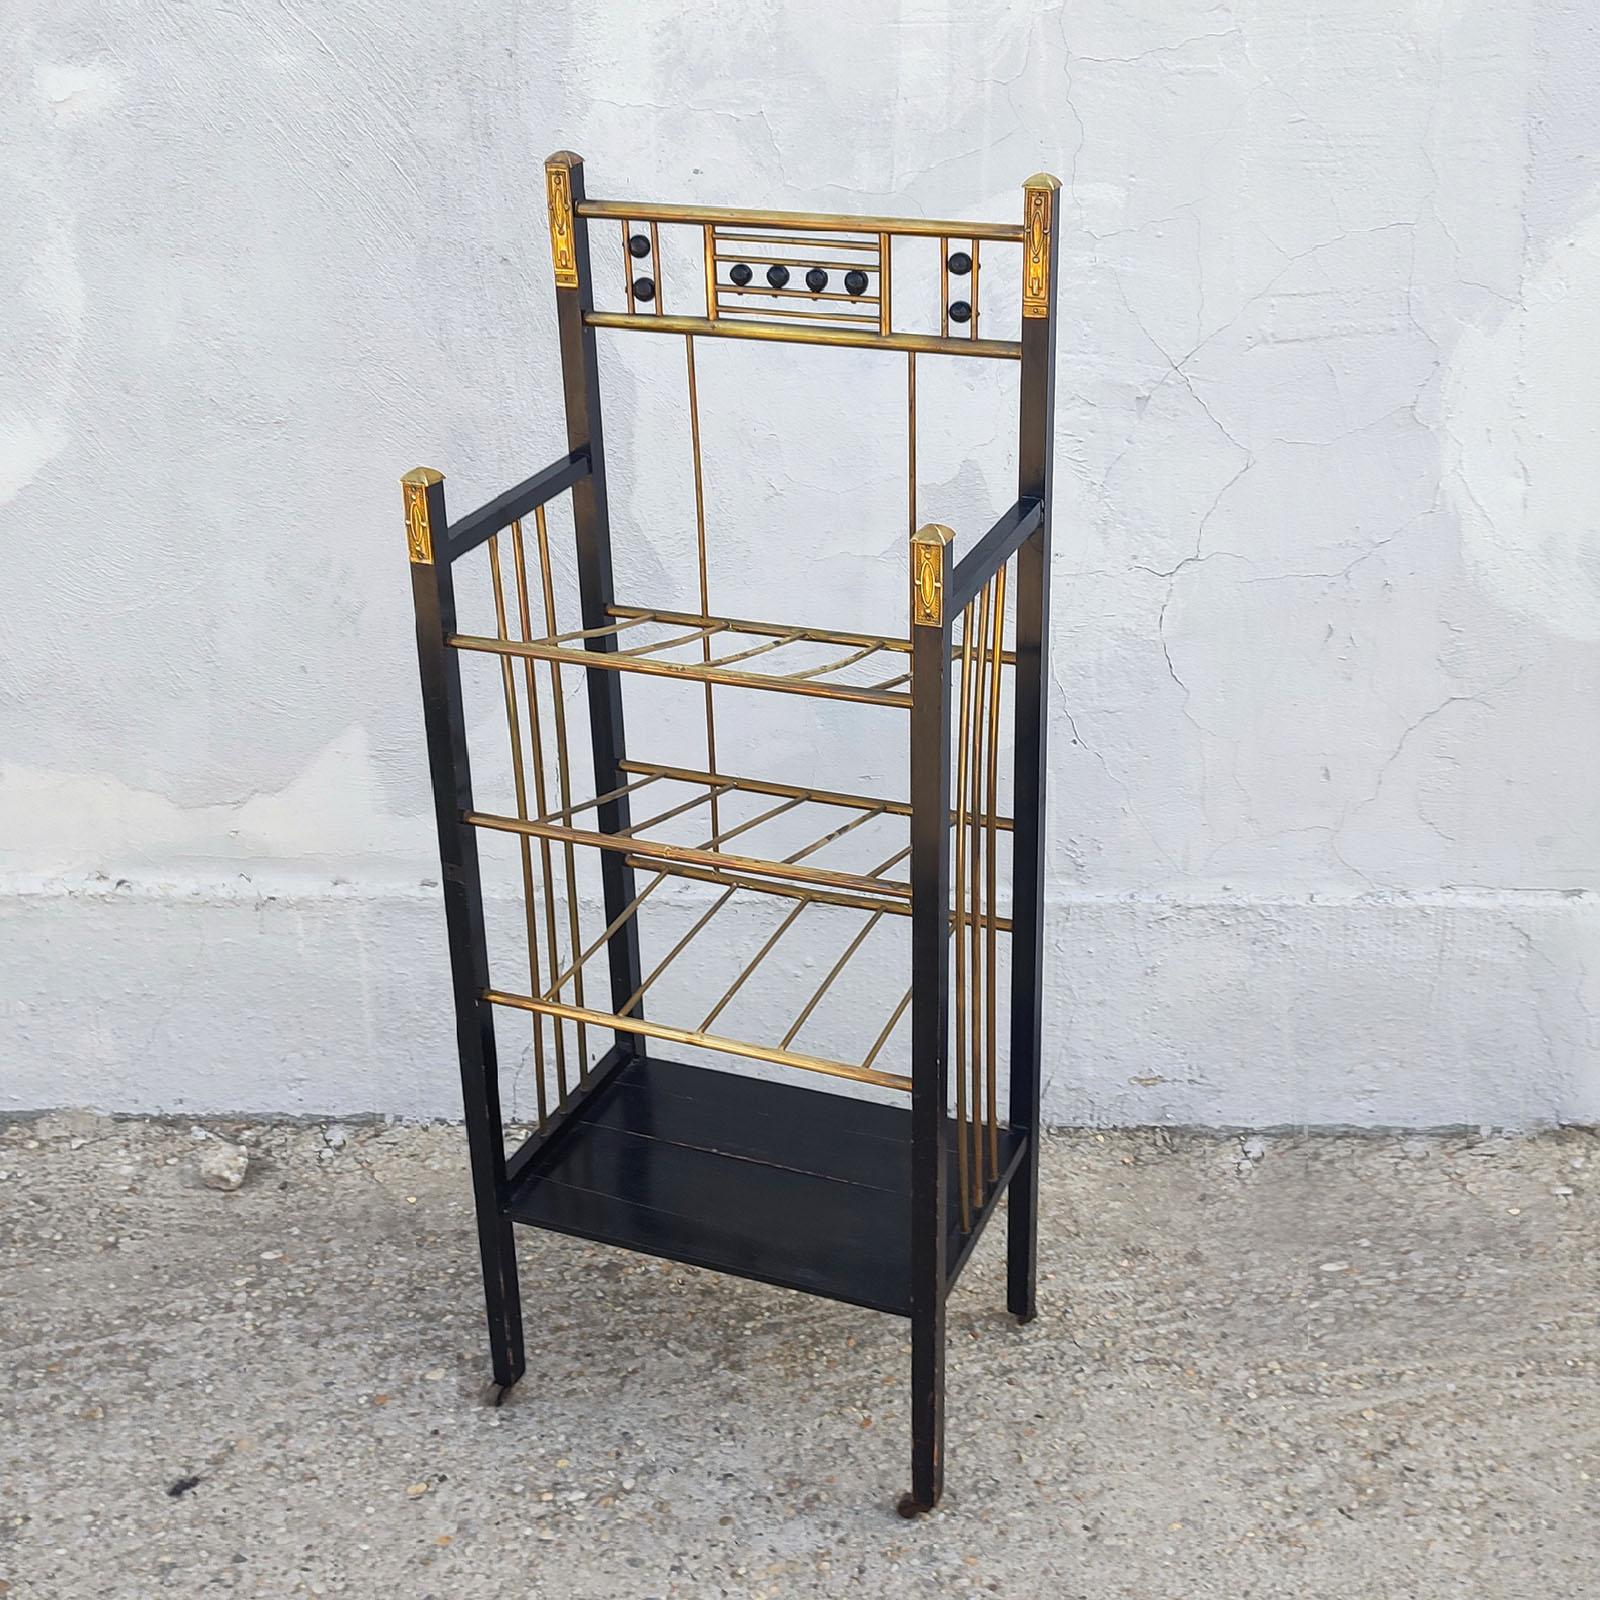 Viennese Secession Stand or Etagere in the Style of Koloman Moser, circa 1900
An elegant ebonized wood and brass etagere/magazine stand/bookcase that suits any contemporary or traditional environment.
Good used original condition with normal wear